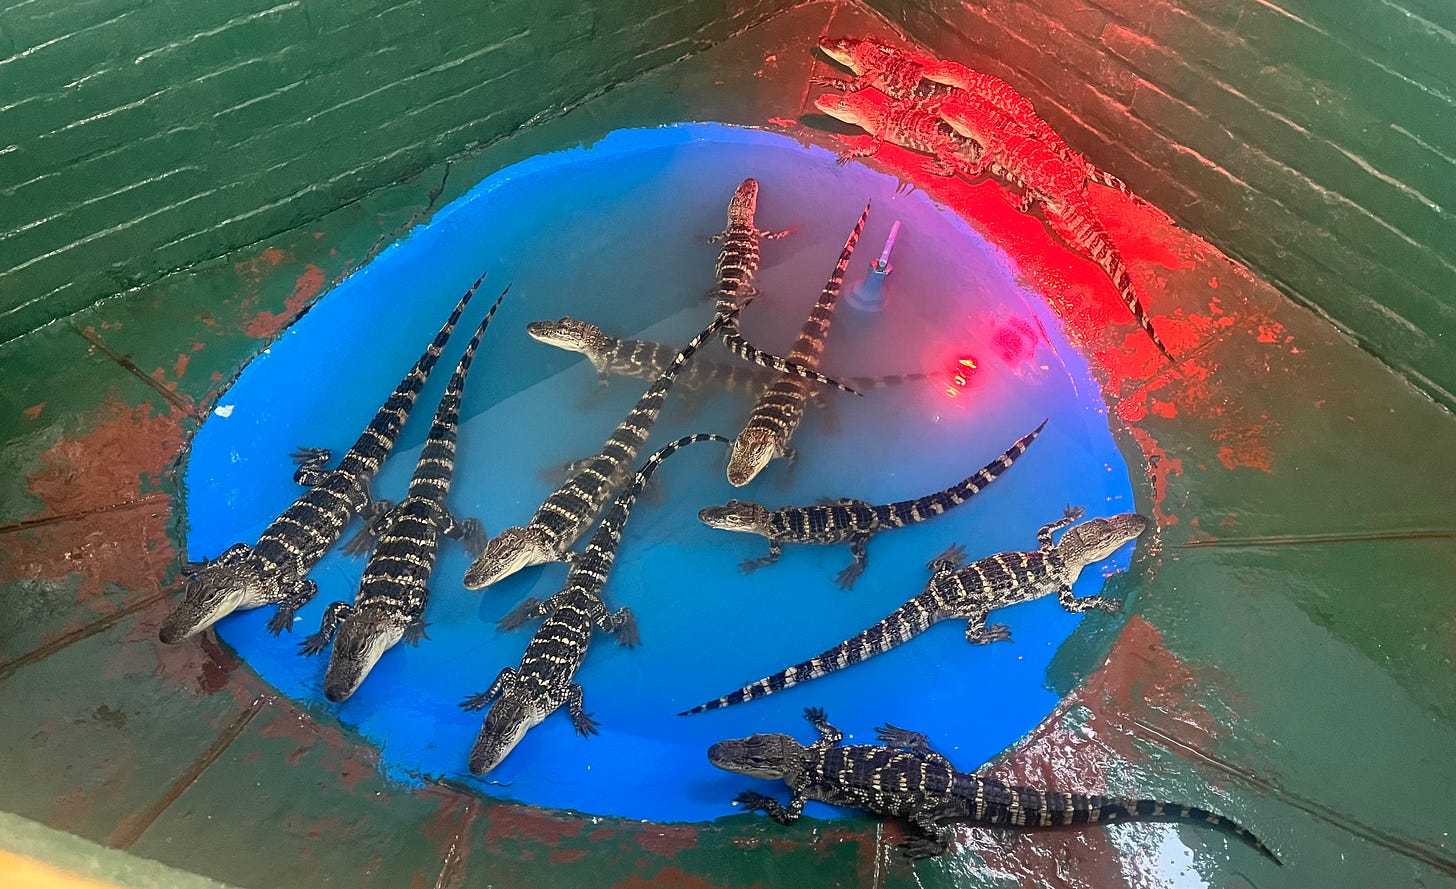 A group of tiny alligators on a wet floor colored green, red, and blue.